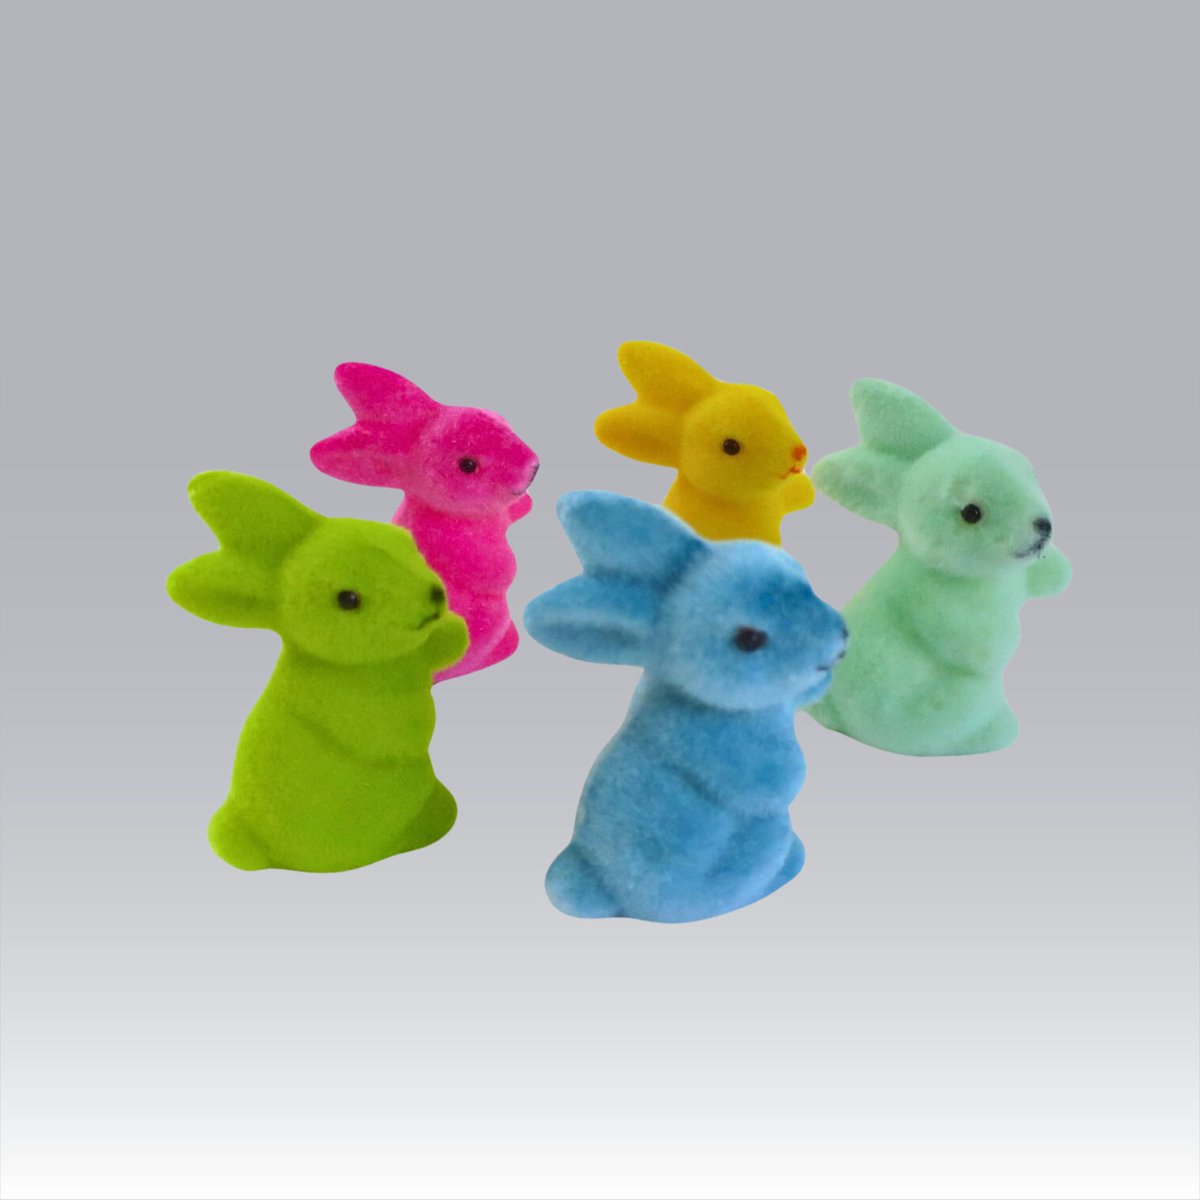 Mini 2' Flocked Bunnies for Spring Tablescapes, Centerpieces, Wreathes, or Tiered Trays, sold separately tuppu.net/434ef8d1 #MomDay2024 #EtsyteamUnity #SMILEtt23 #Vintage4Sale